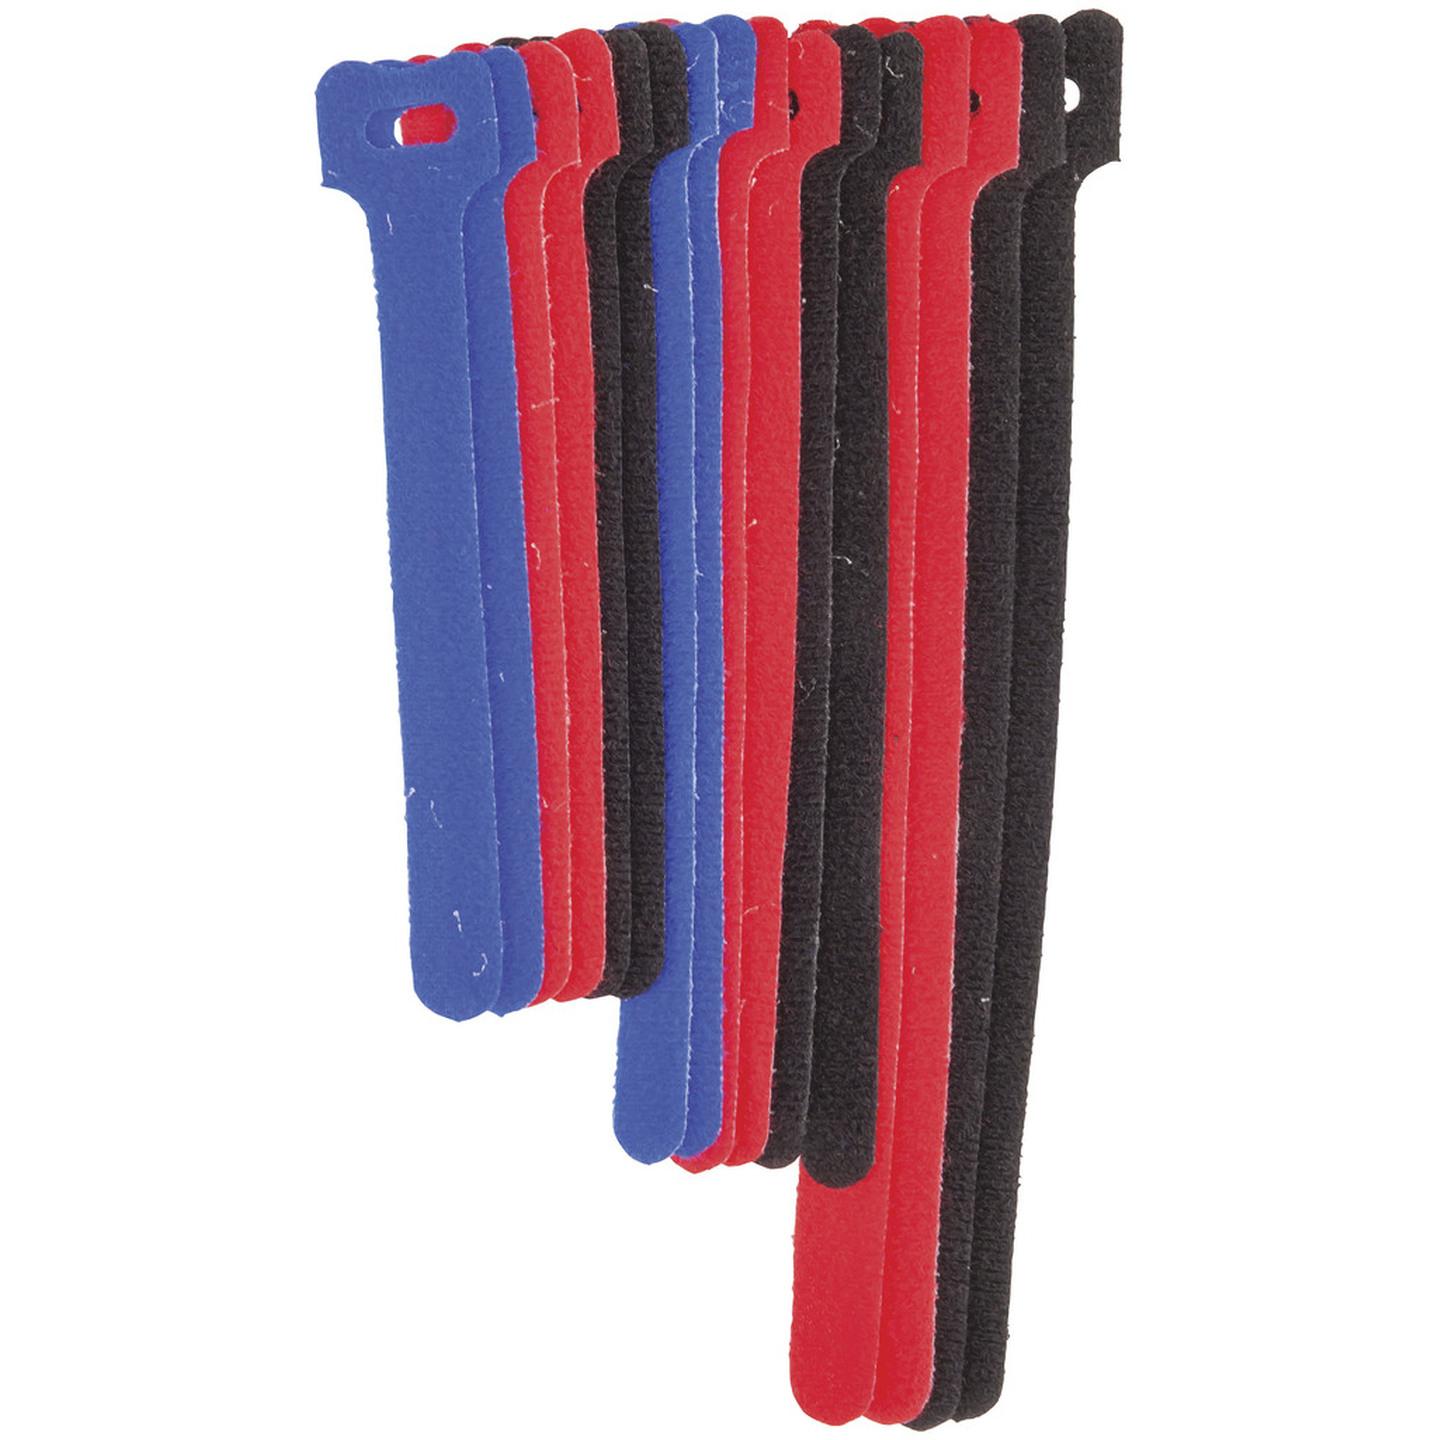 Mixed Hook and Loop Cable Ties Pack of 16